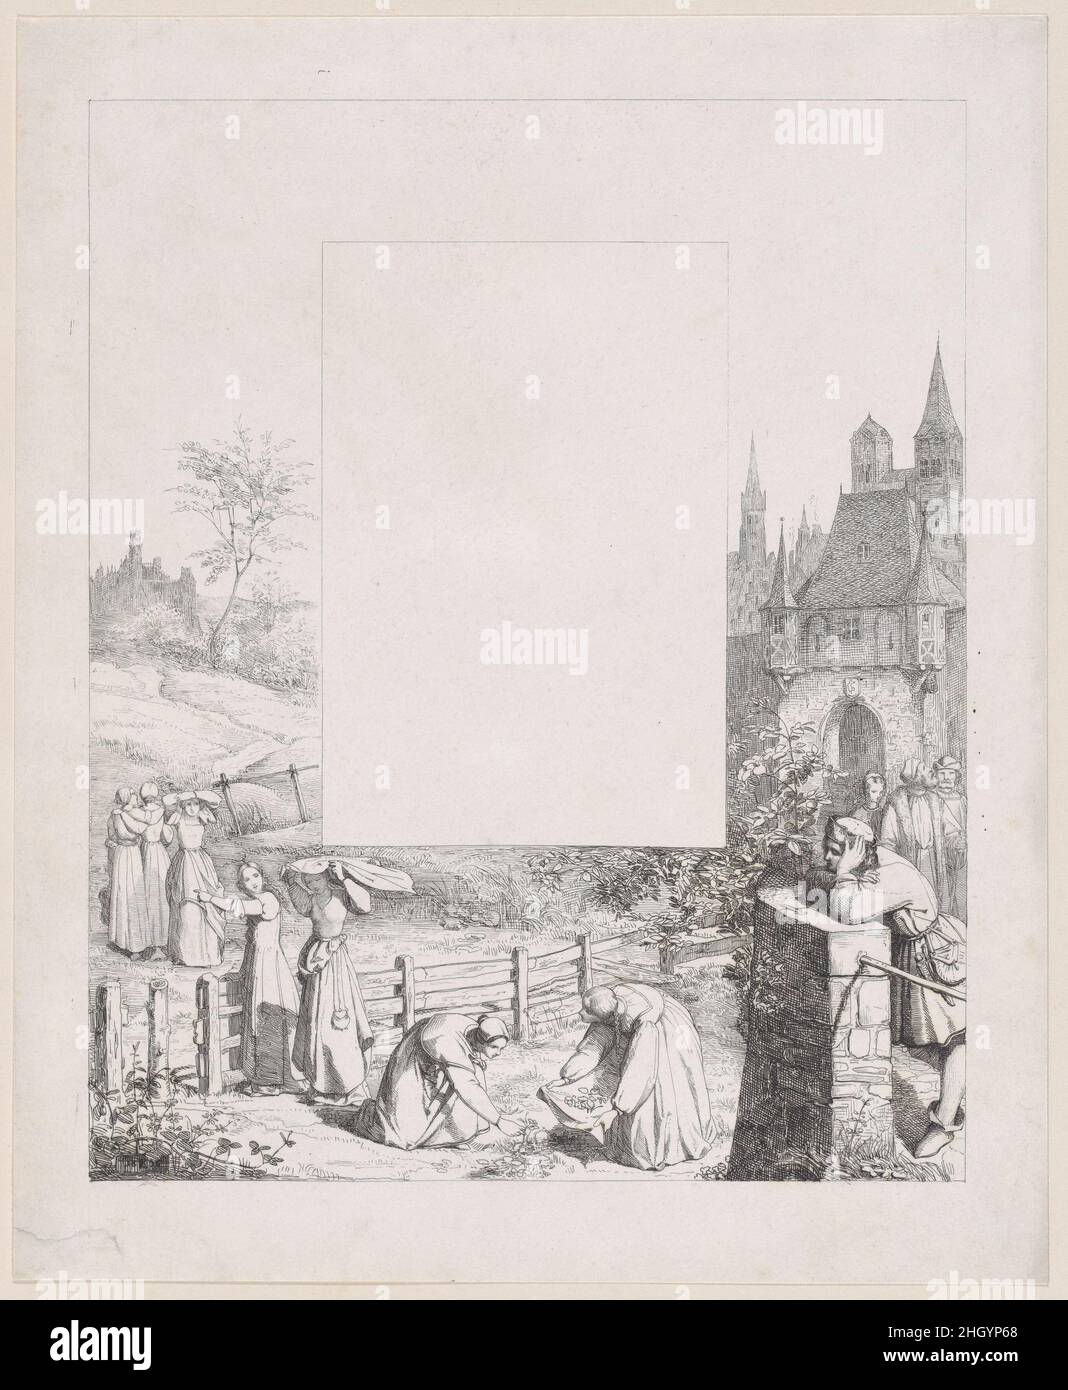 Plate 5: women collecting plants and carrying them over their heads, a male onlooker at right and a castle at right in the background, from "Lieder eines Malers mit Randzeichnungen seiner Freunde" 1836 Eduard Julius Friedrich Bendemann. Plate 5: women collecting plants and carrying them over their heads, a male onlooker at right and a castle at right in the background, from "Lieder eines Malers mit Randzeichnungen seiner Freunde". Lieder eines Malers mit Randzeichnungen seiner Freunde. Eduard Julius Friedrich Bendemann (German, Berlin 1811–1889 Düsseldorf). 1836. Etching. Prints Stock Photo